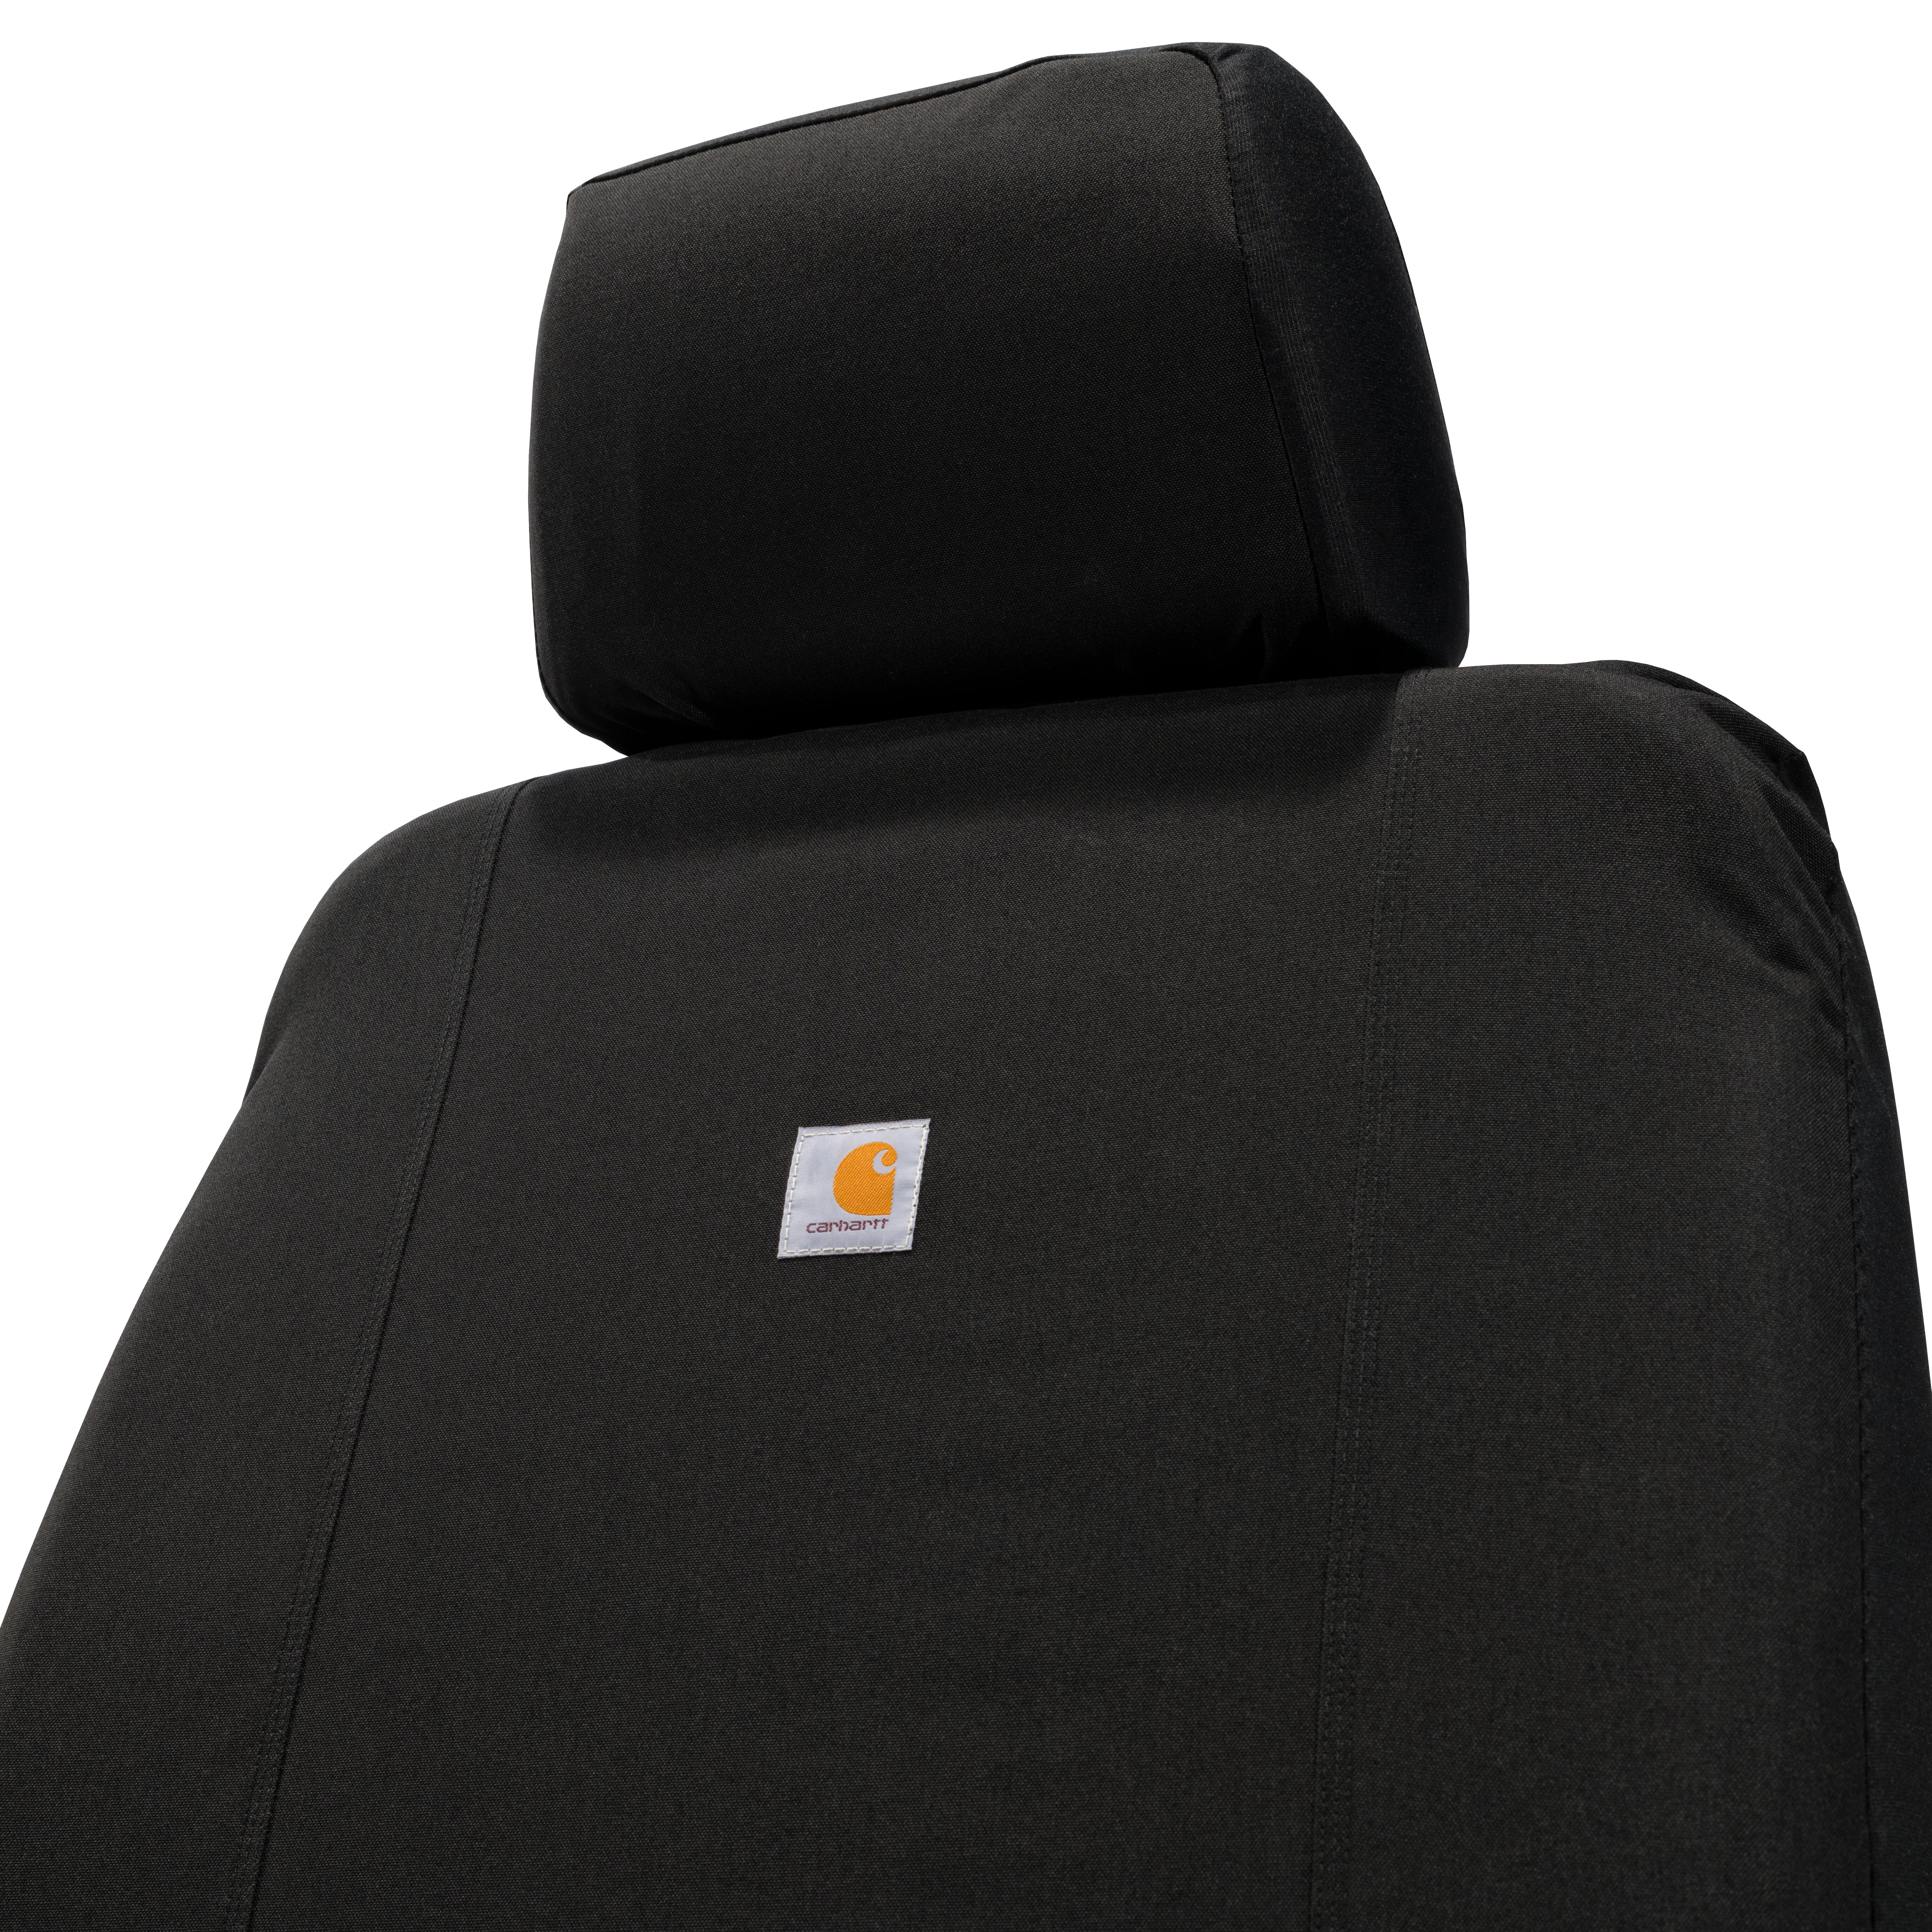 Universal Low Back Seat Cover